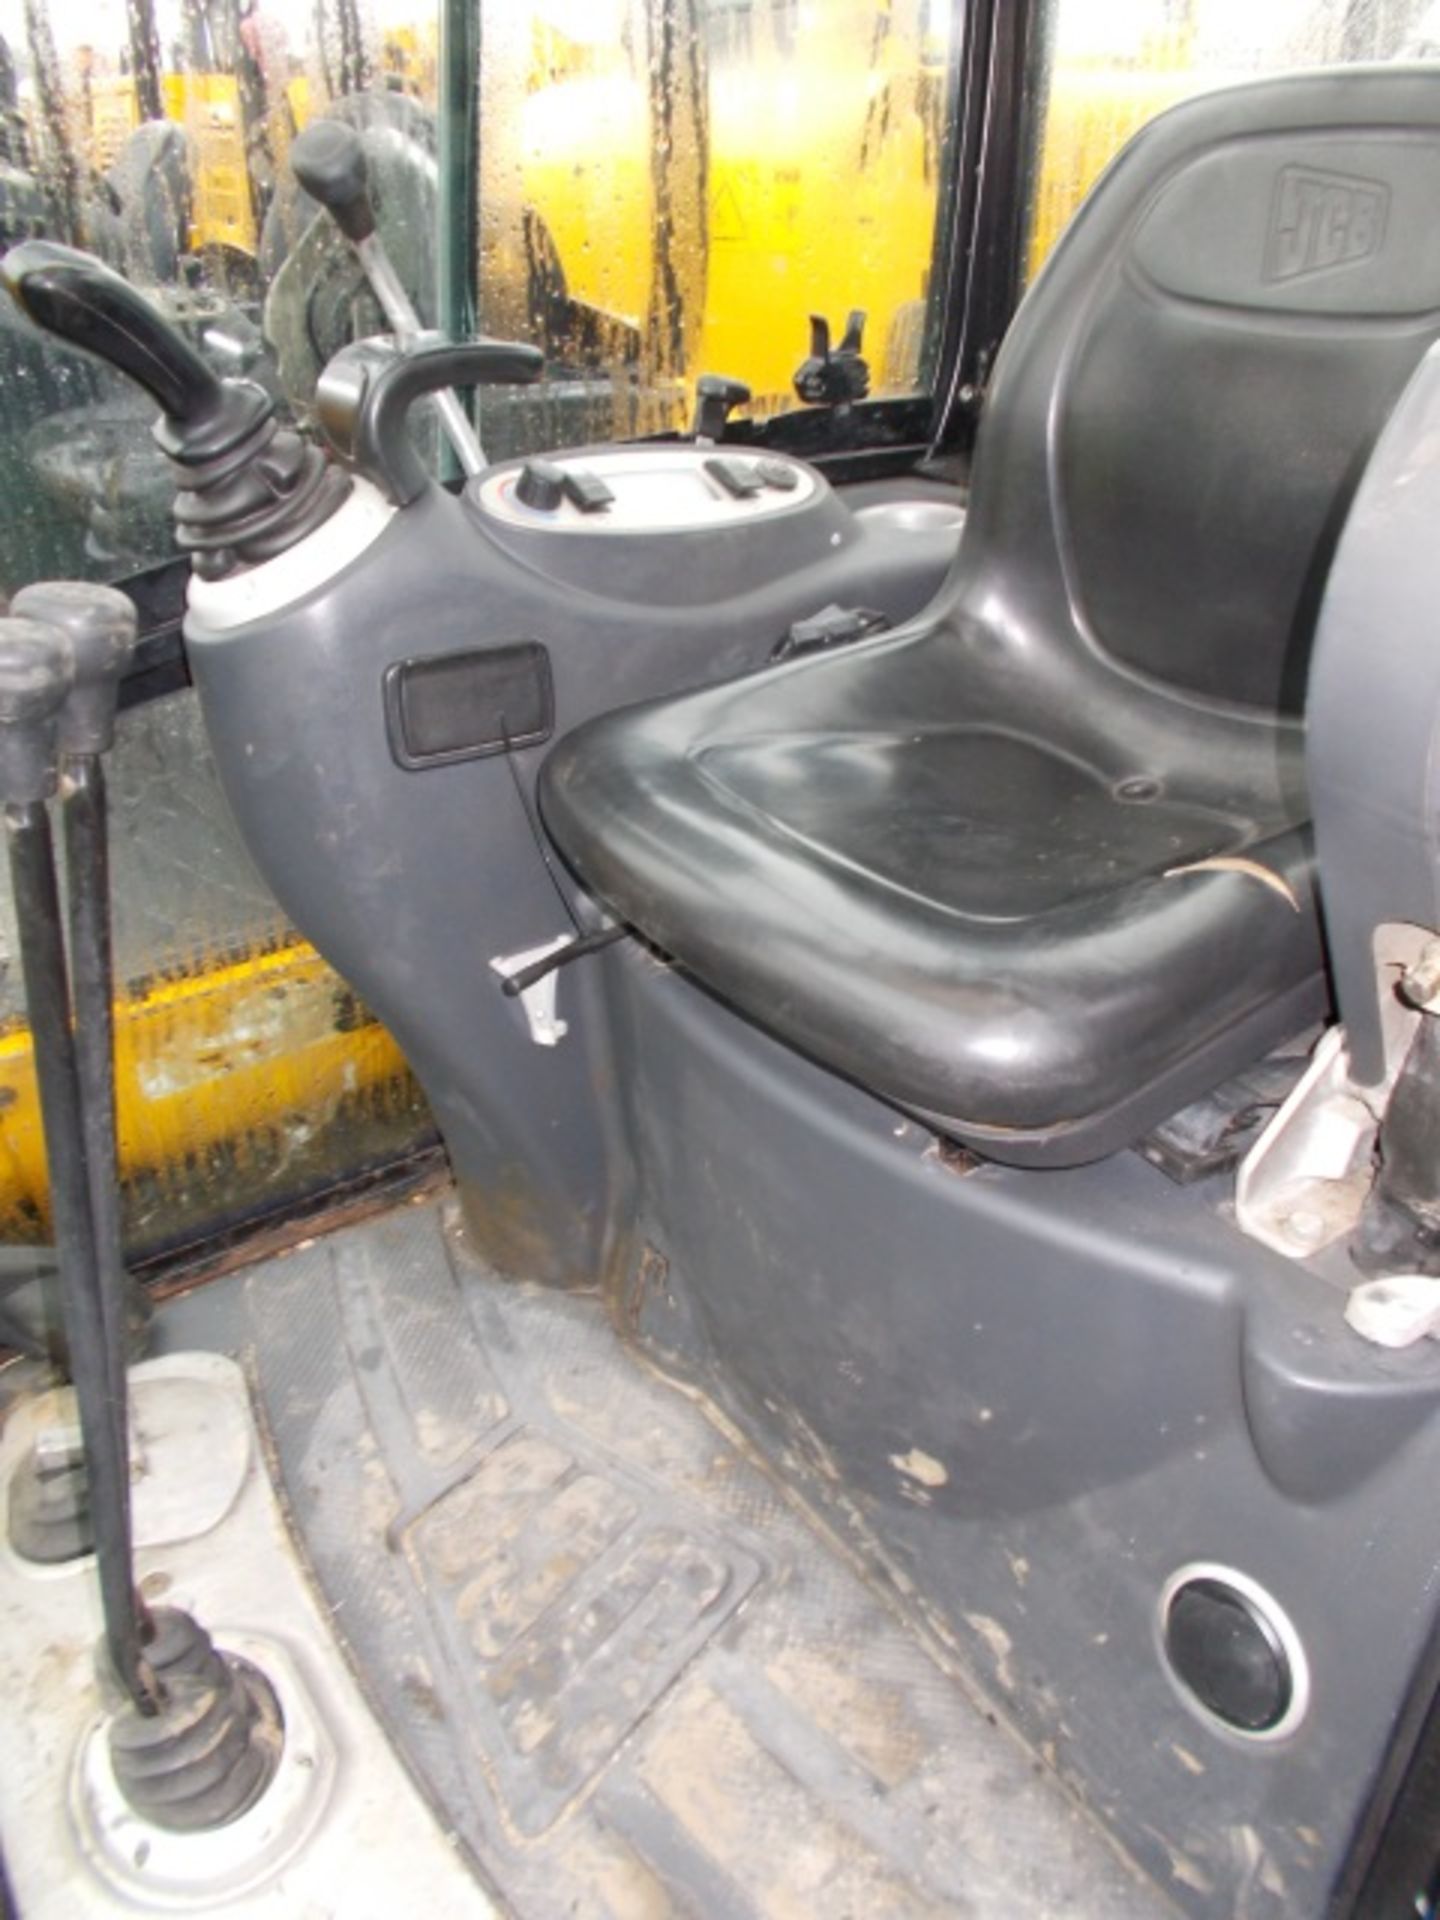 JCB 2007 801.6 rubber tracked mini excavator pipe blade & bucket (1922 rec hrs) RDD - Image 4 of 4